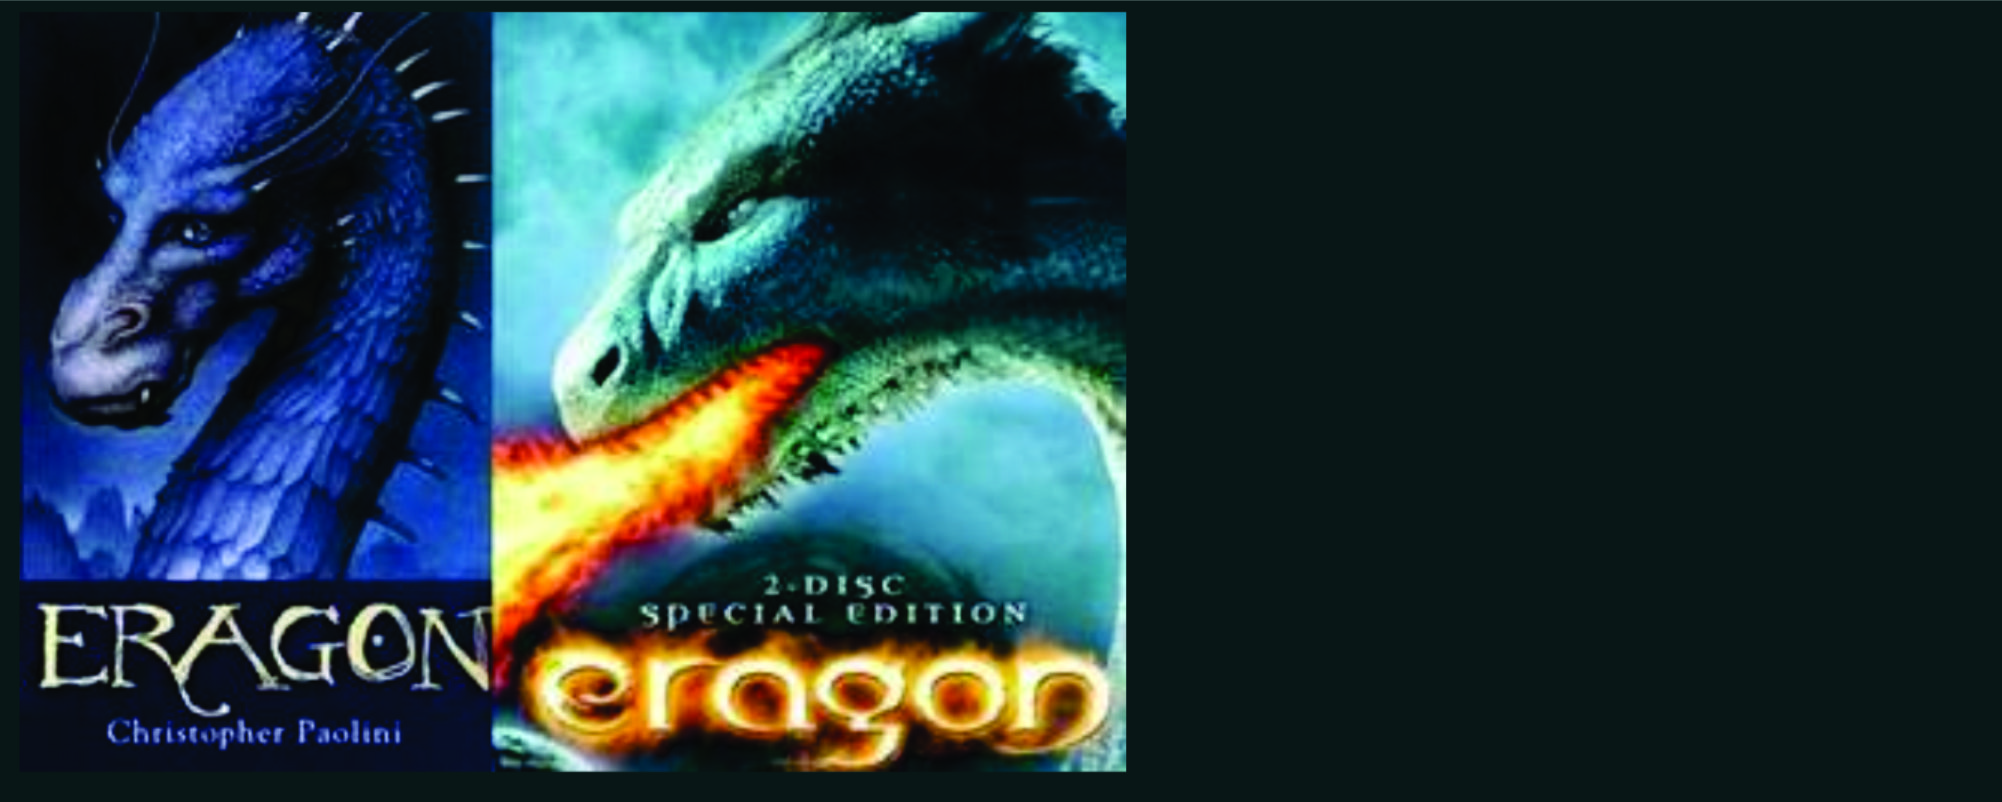 Dragon book and movie covers